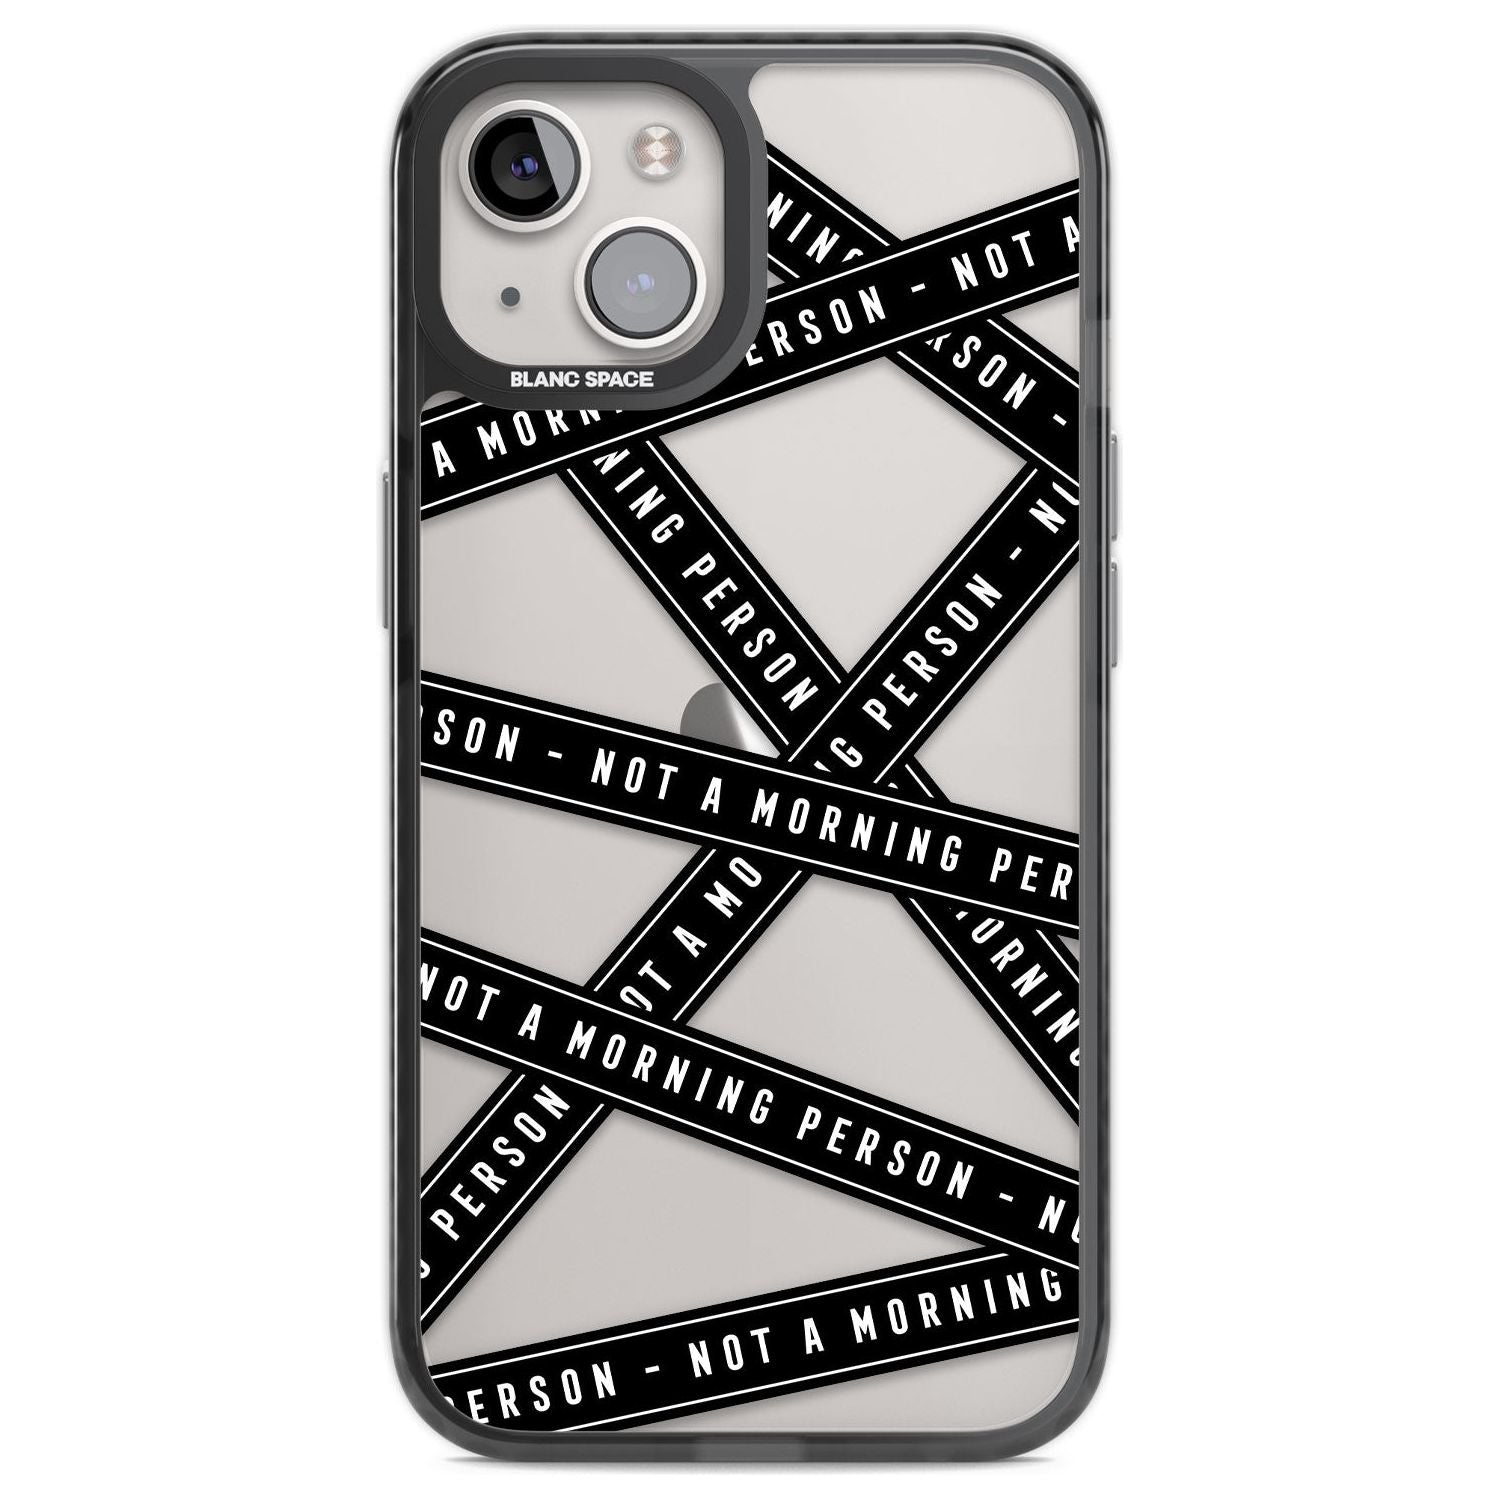 Caution Tape (Clear) Not a Morning Person Phone Case iPhone 12 / Black Impact Case,iPhone 13 / Black Impact Case,iPhone 12 Pro / Black Impact Case,iPhone 14 / Black Impact Case,iPhone 15 Plus / Black Impact Case,iPhone 15 / Black Impact Case Blanc Space